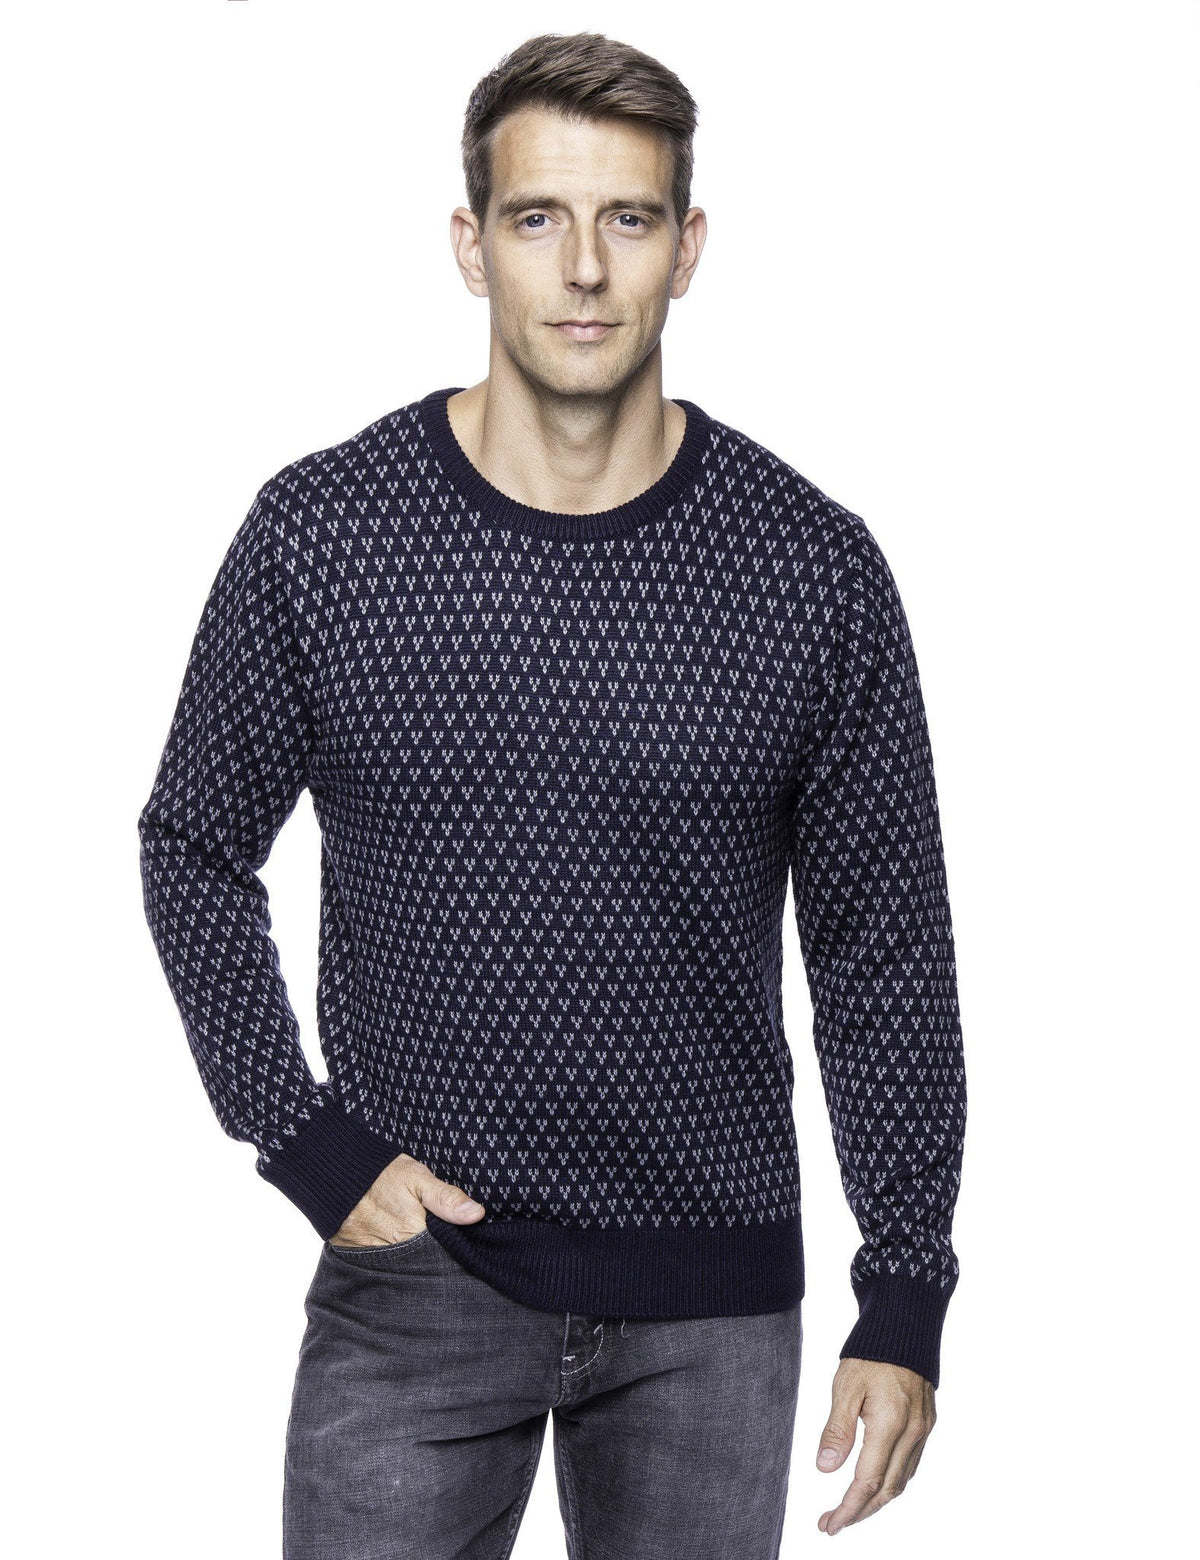 Men's Wool Blend Crew Neck Pullover Sweater with Jacquard Effect - Navy/Heather Grey